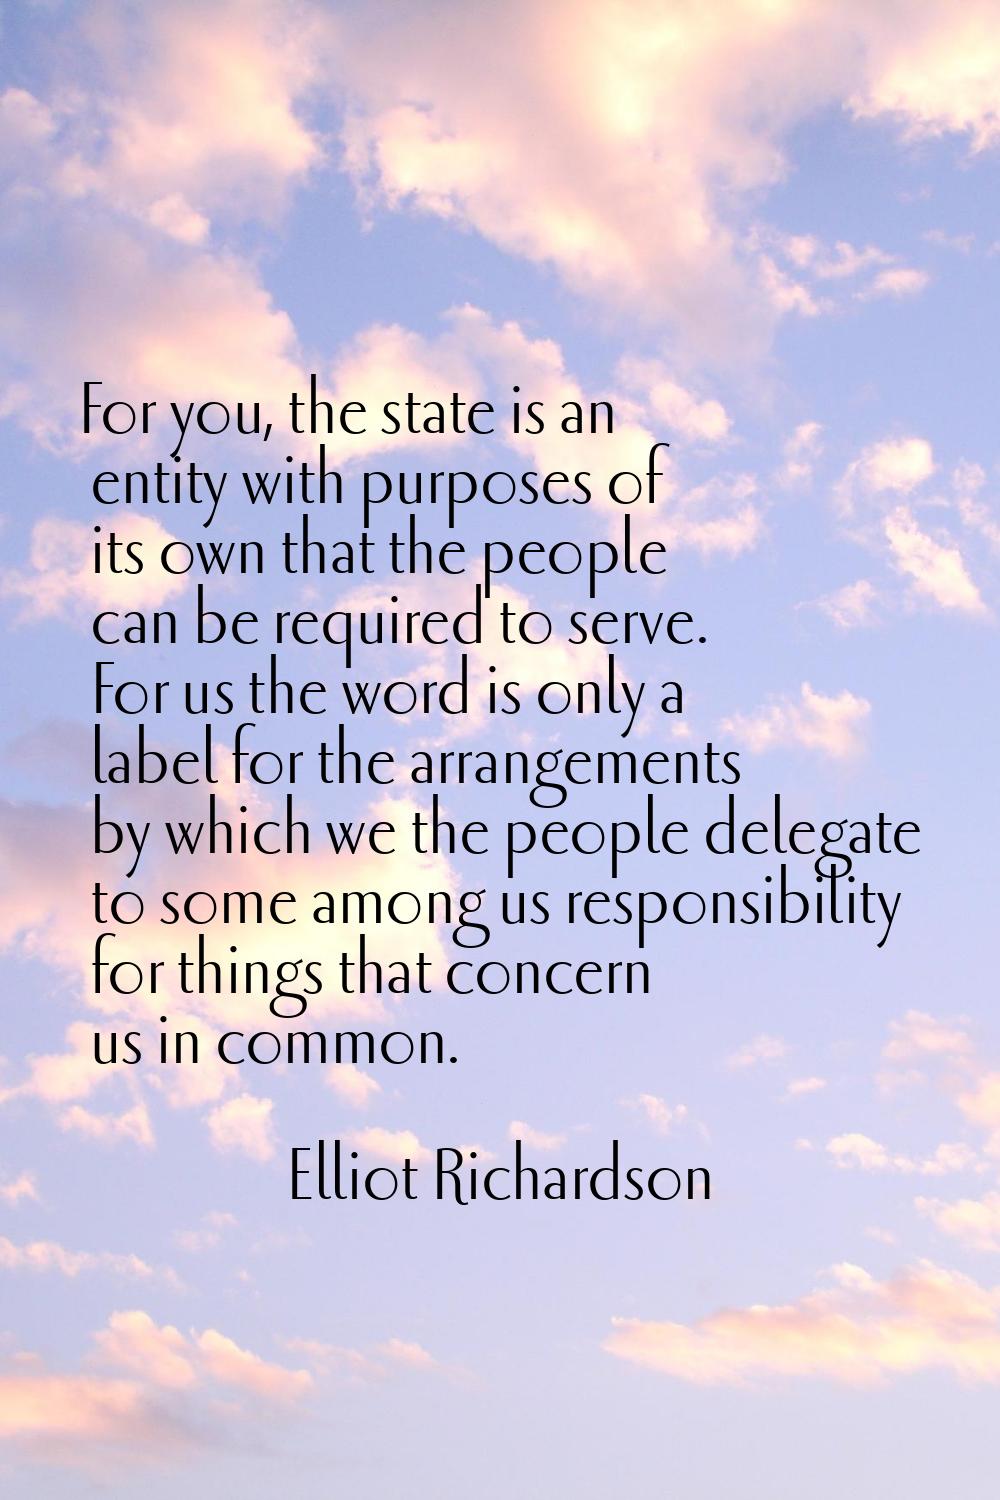 For you, the state is an entity with purposes of its own that the people can be required to serve. 